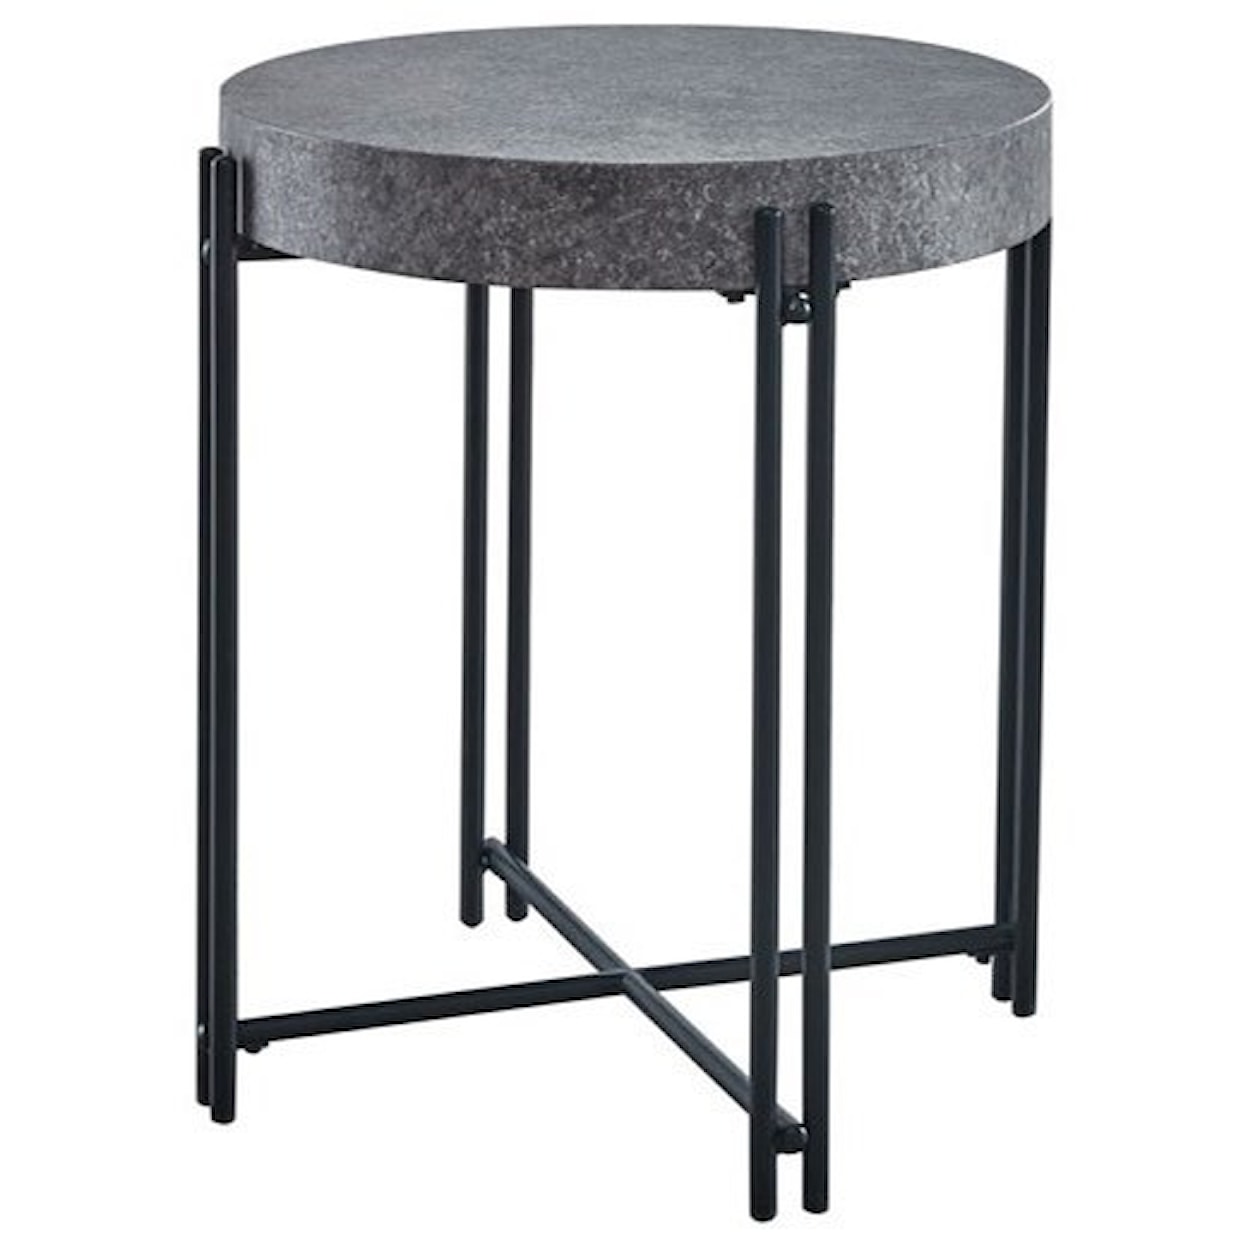 Steve Silver Morty MORTY GREY END TABLE |